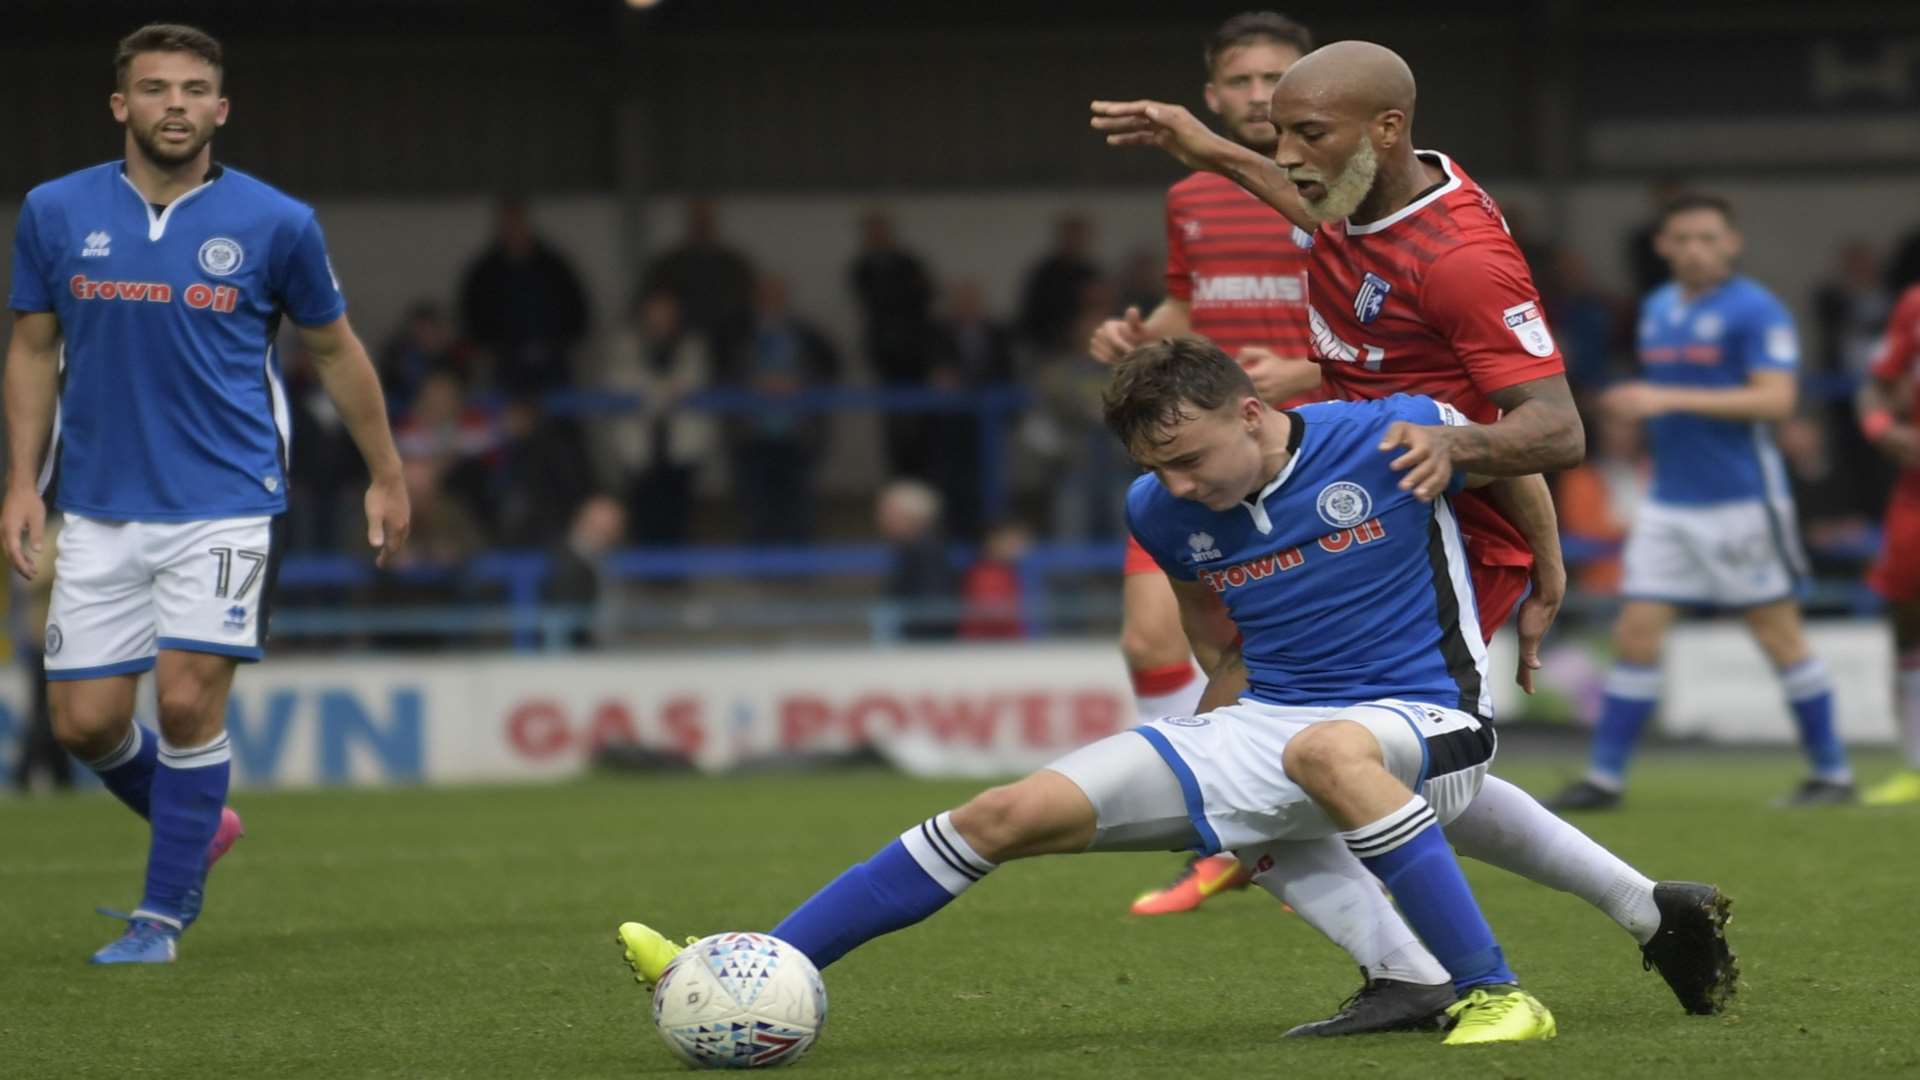 Josh Parker puts the Rochdale defence under pressure Picture: Barry Goodwin